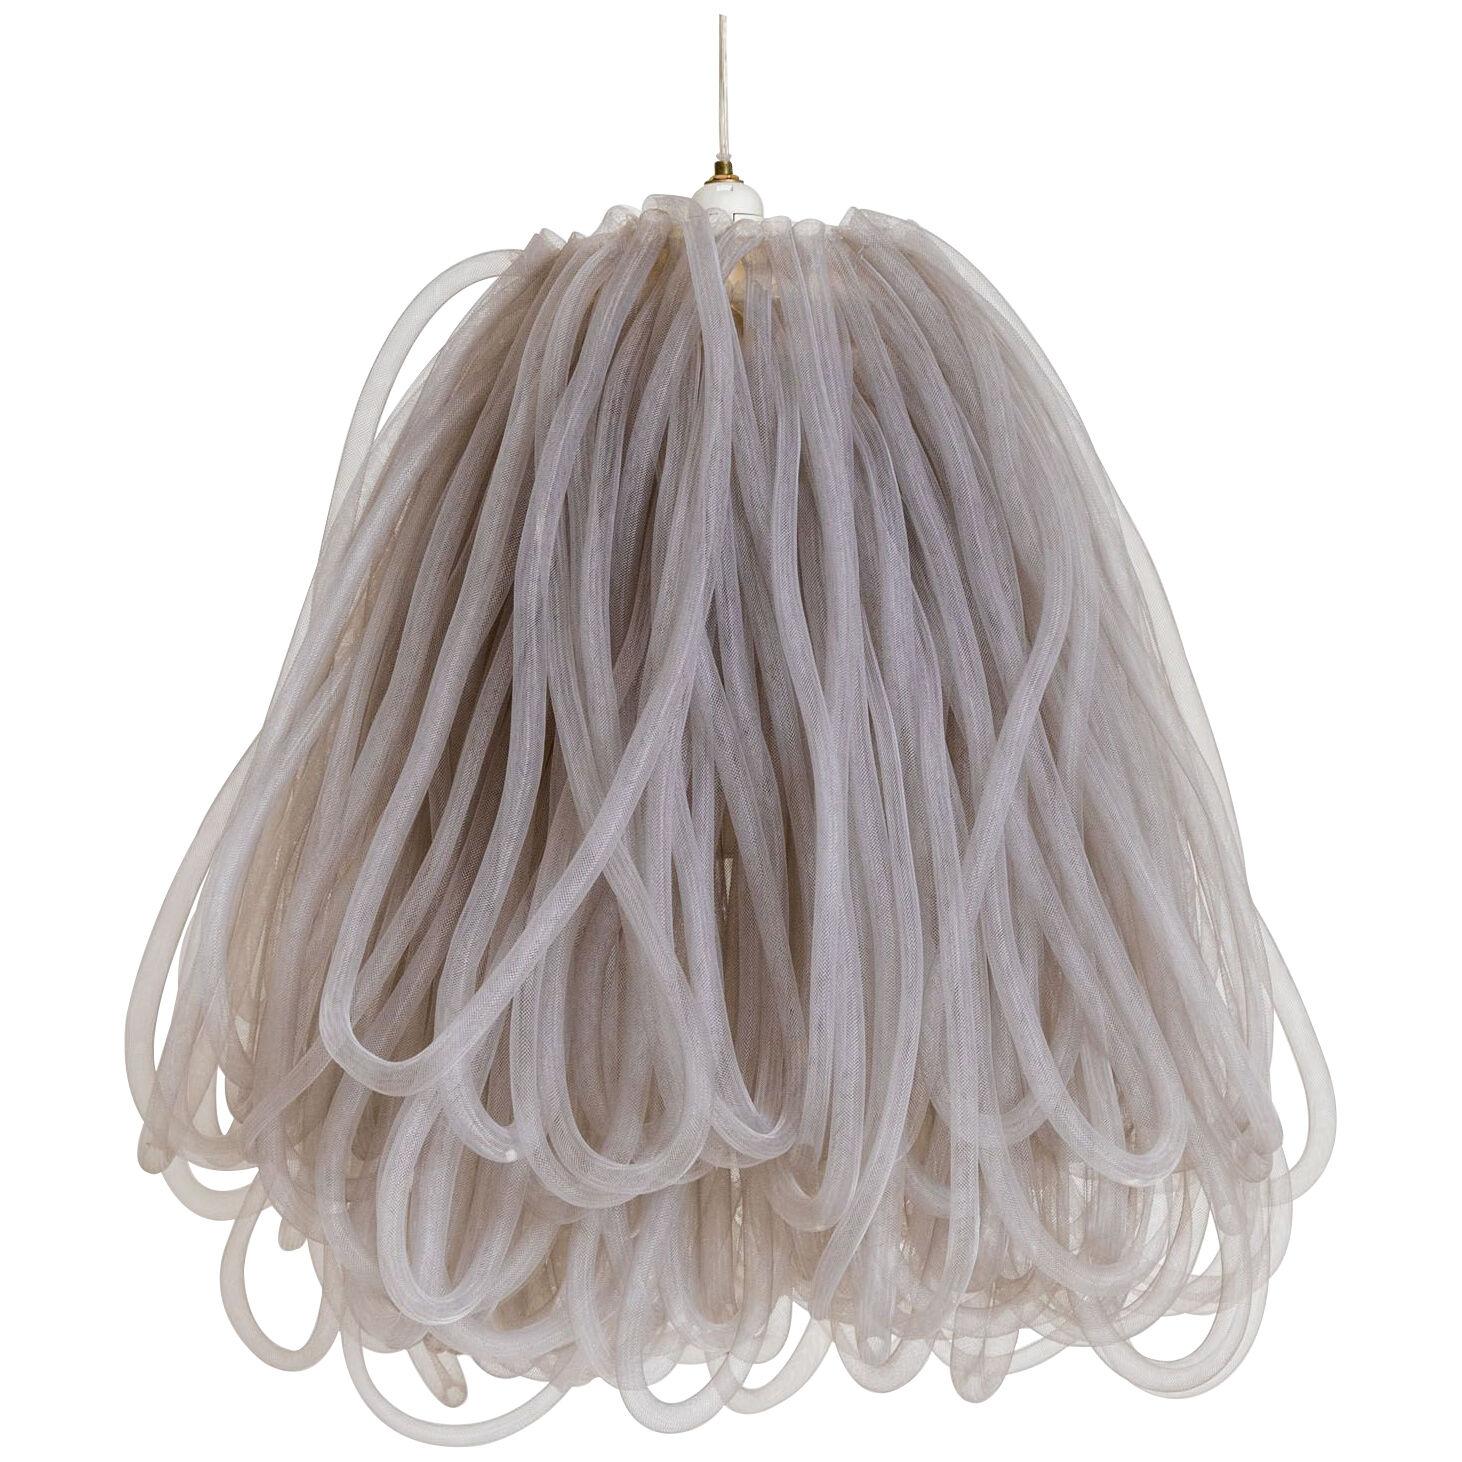 Hanging lamp by Tina Leung for Innermost, United Kingdom, 1990s